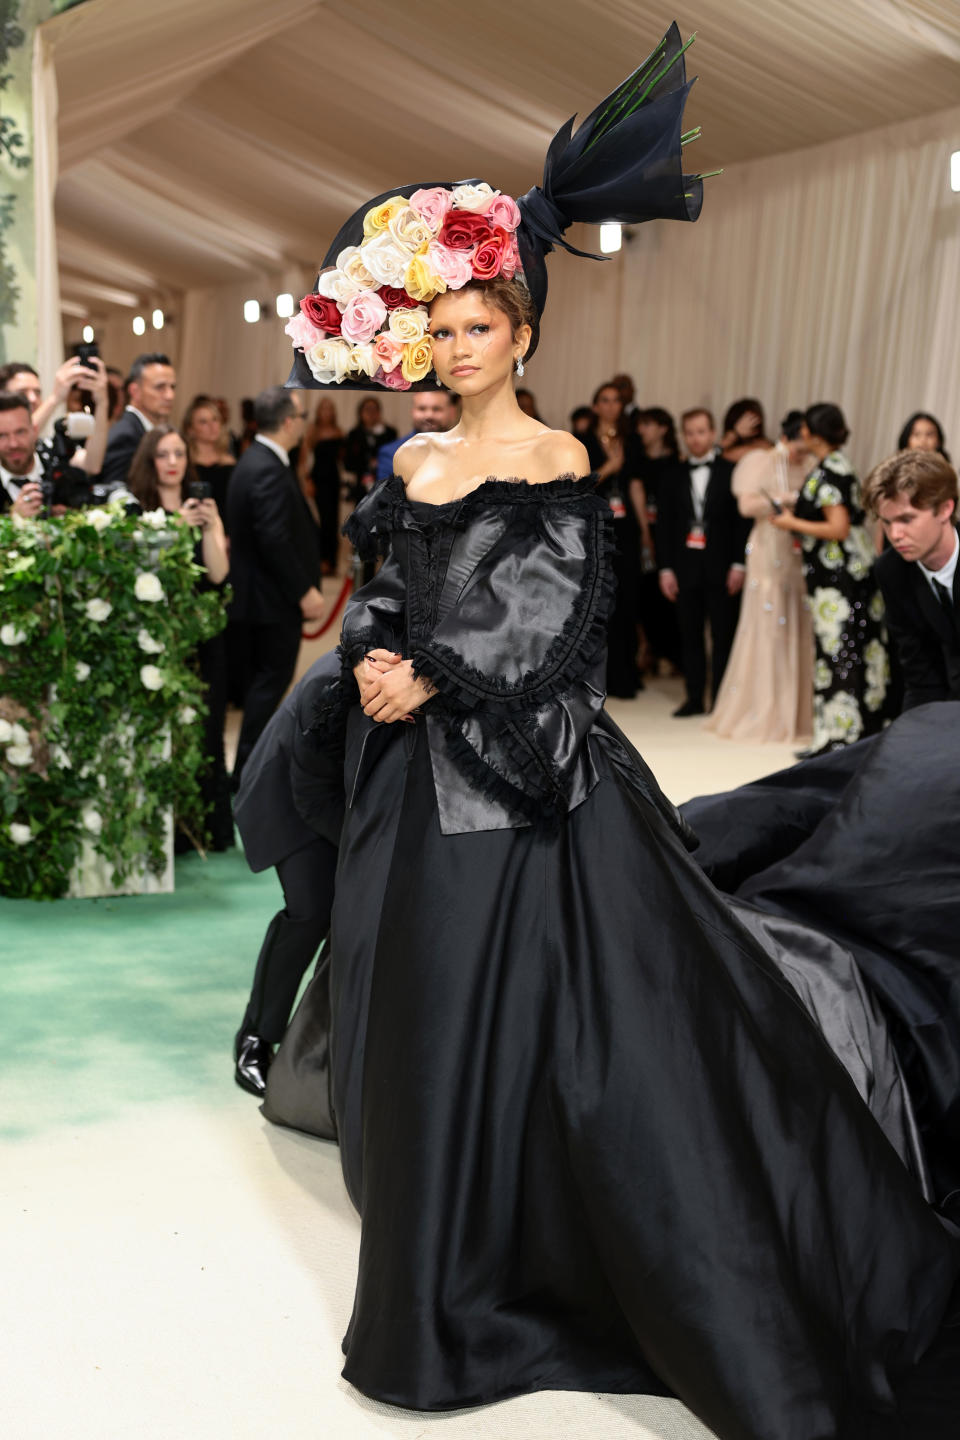 Zendaya in a black gown with a pink floral headpiece at an event